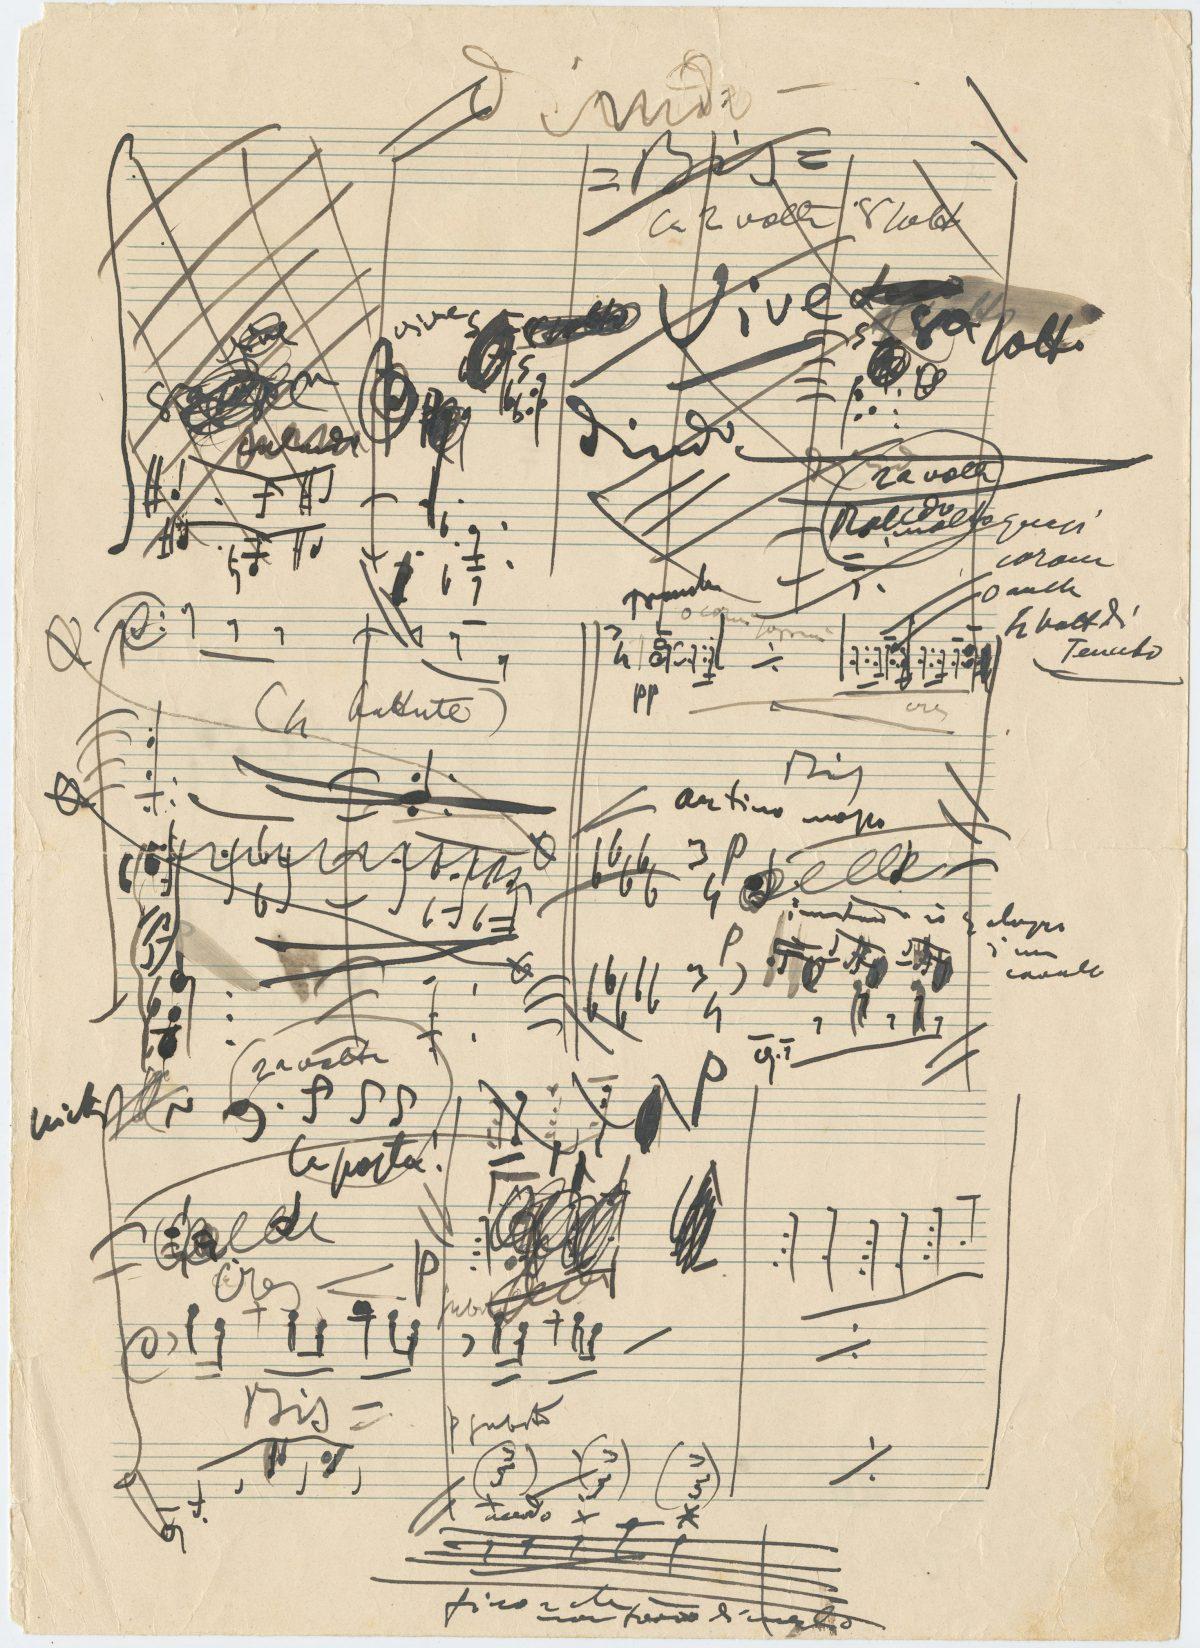 An autograph manuscript draft of a portion of Act 1 from "The Girl of the Golden West" ("La Fanciulla del West"), circa 1908, by Giacomo Puccini. Collection of Pedro Corrêa do Lago. (The Morgan Library & Museum)